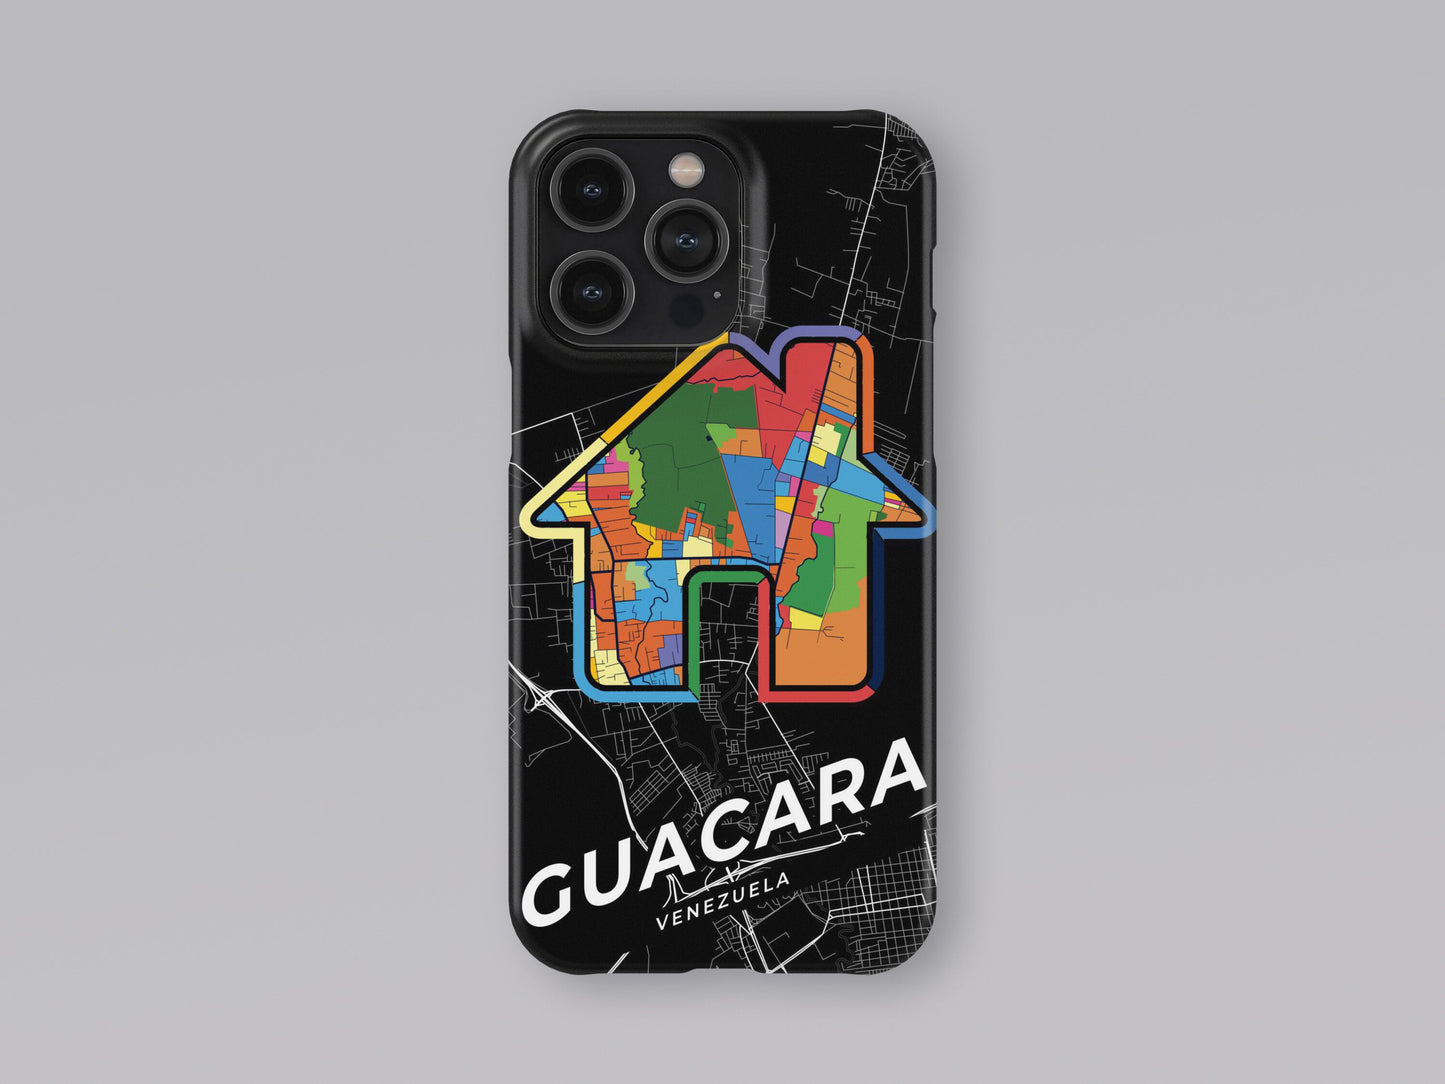 Guacara Venezuela slim phone case with colorful icon. Birthday, wedding or housewarming gift. Couple match cases. 3